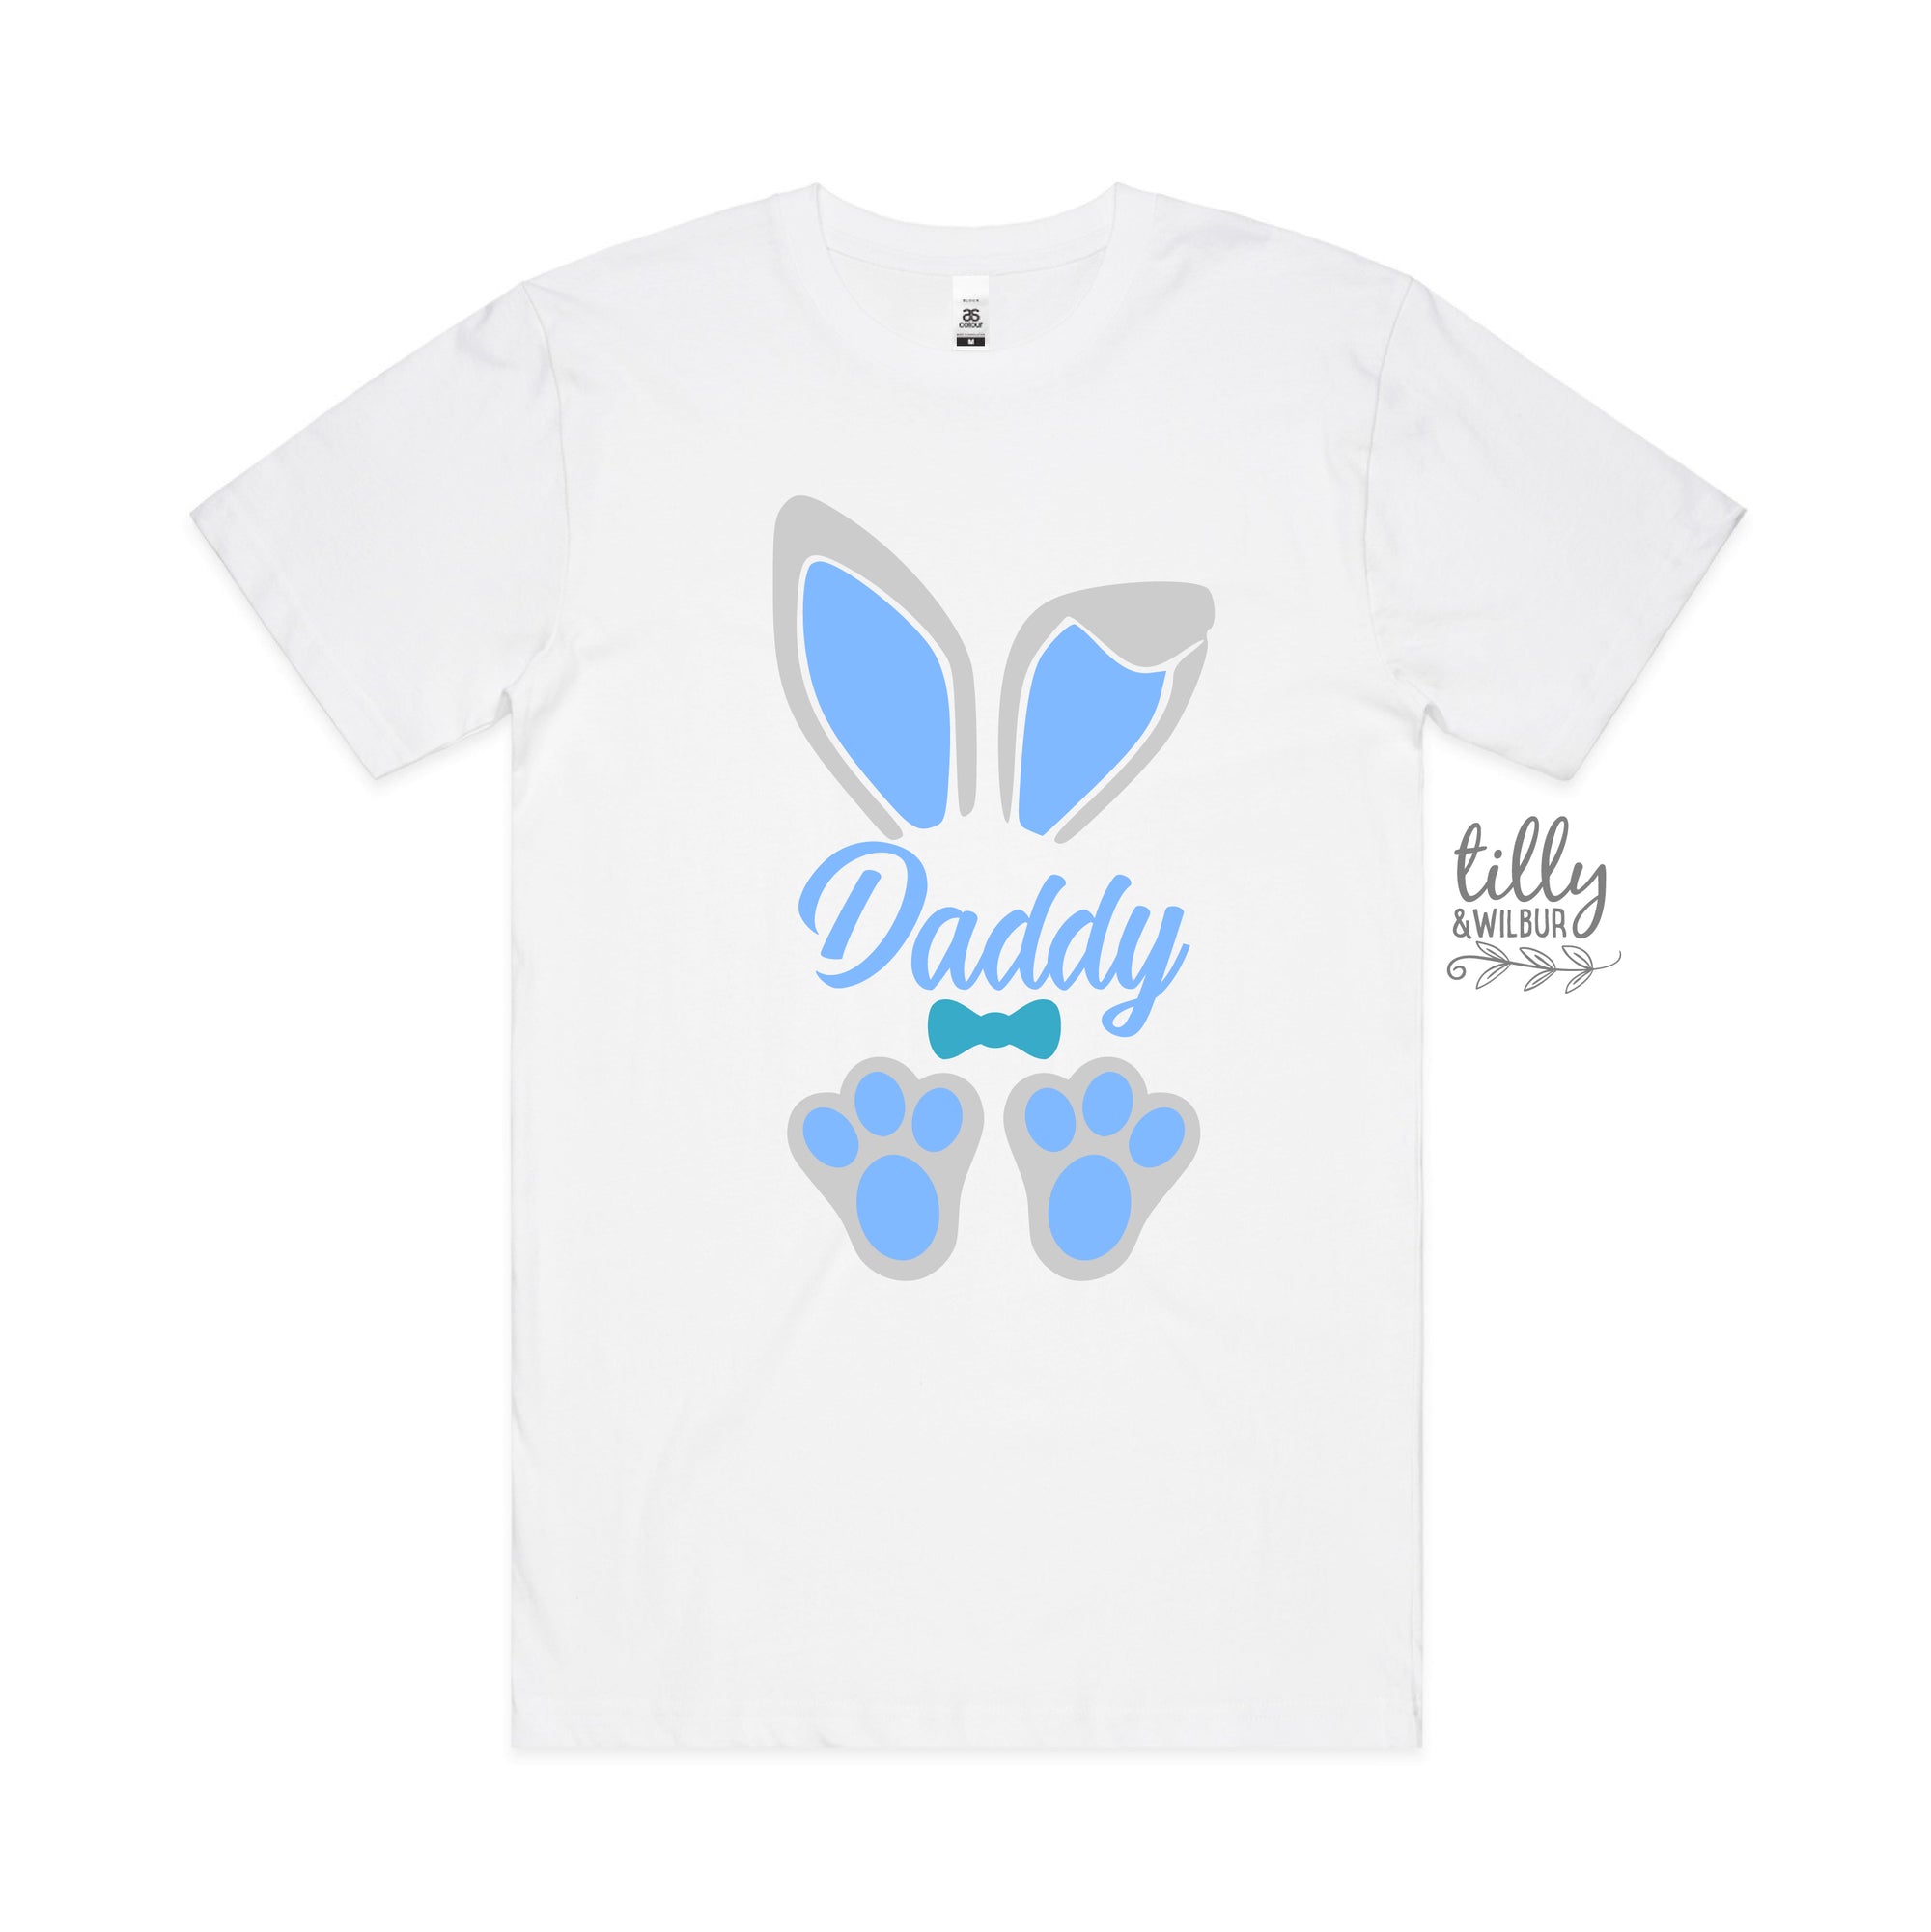 Daddy Bunny Easter T-Shirt